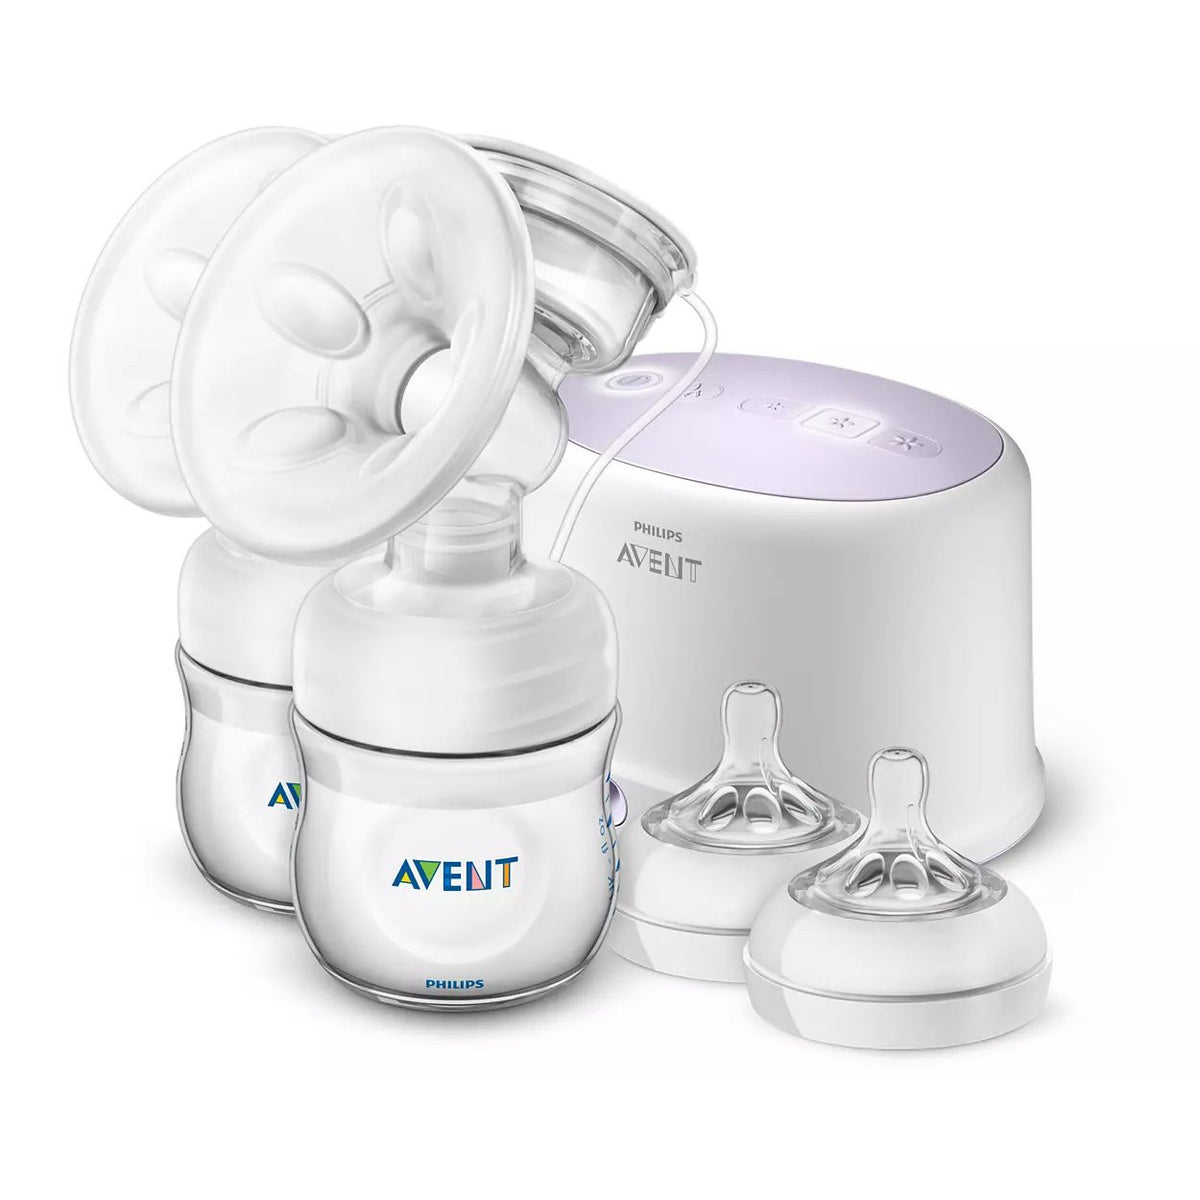 philips-avent-double-electric-breast-pump- (1)